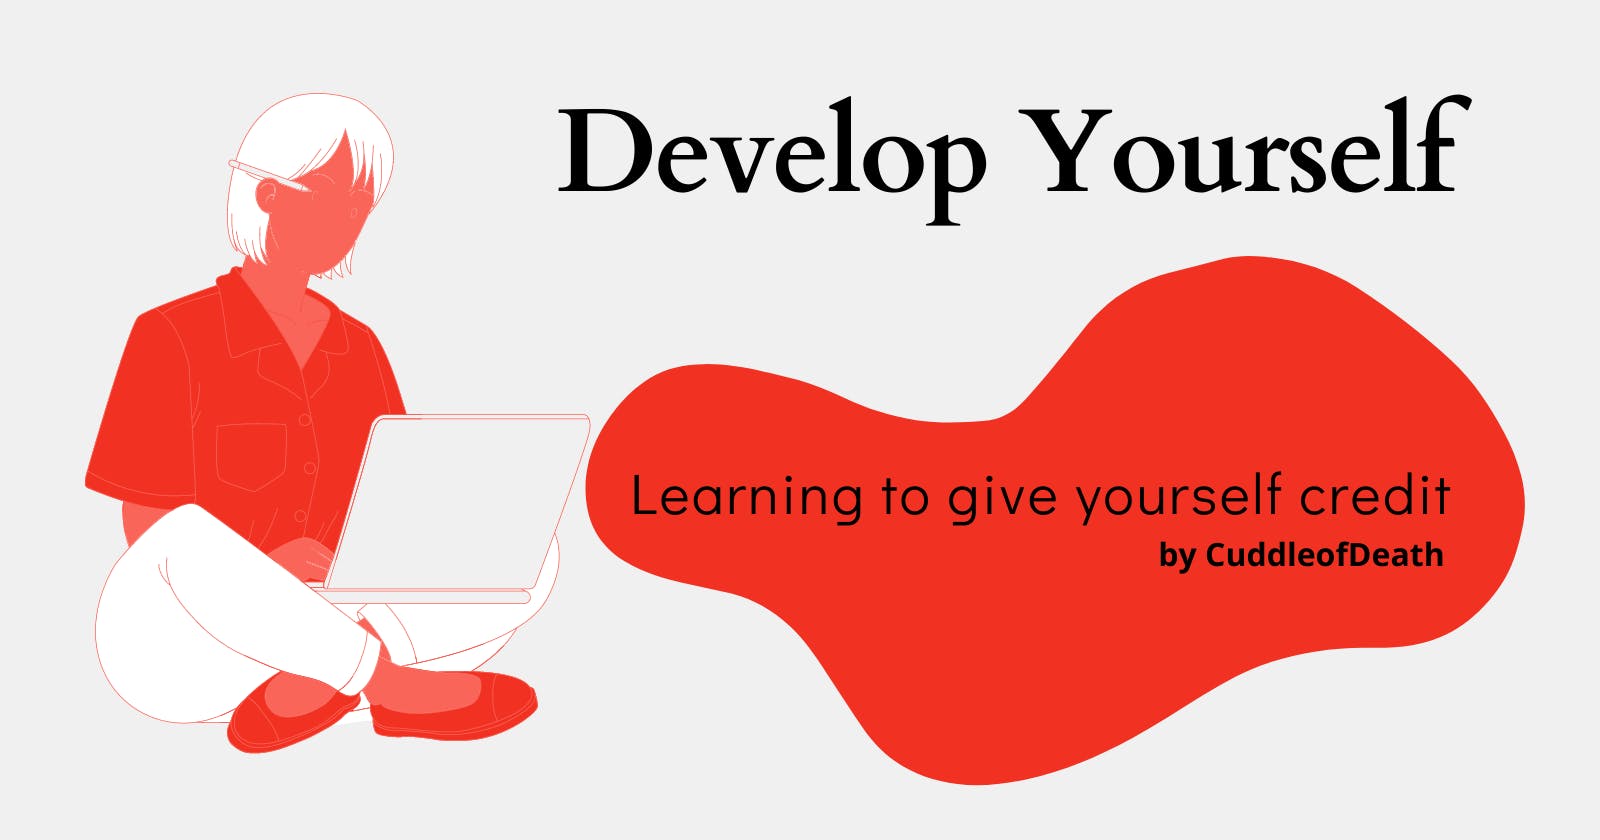 Develop Yourself!